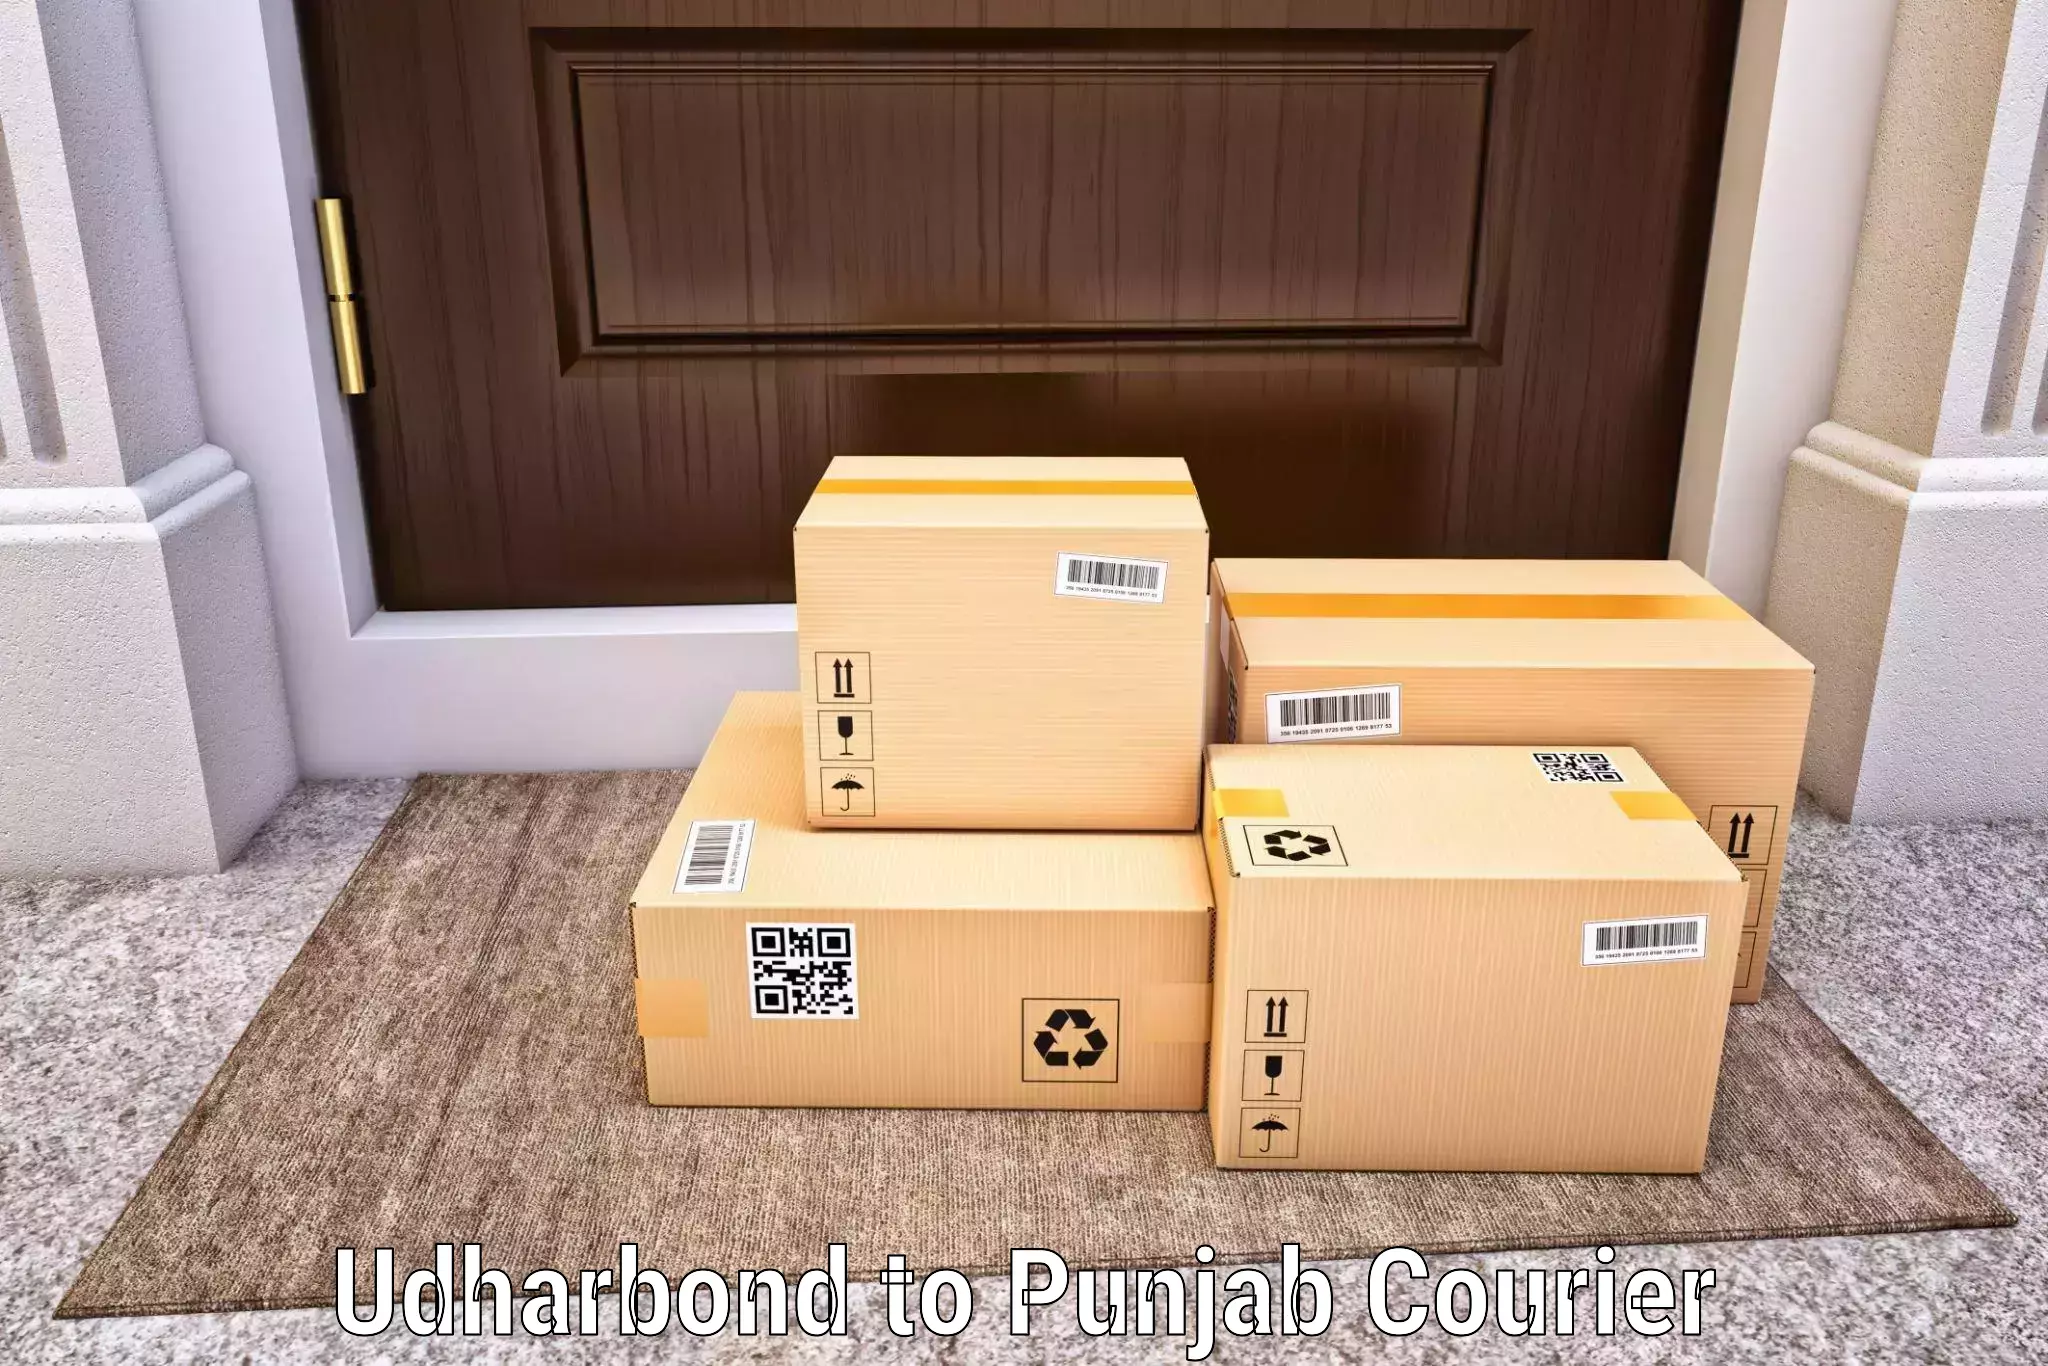 24-hour courier services in Udharbond to Samana